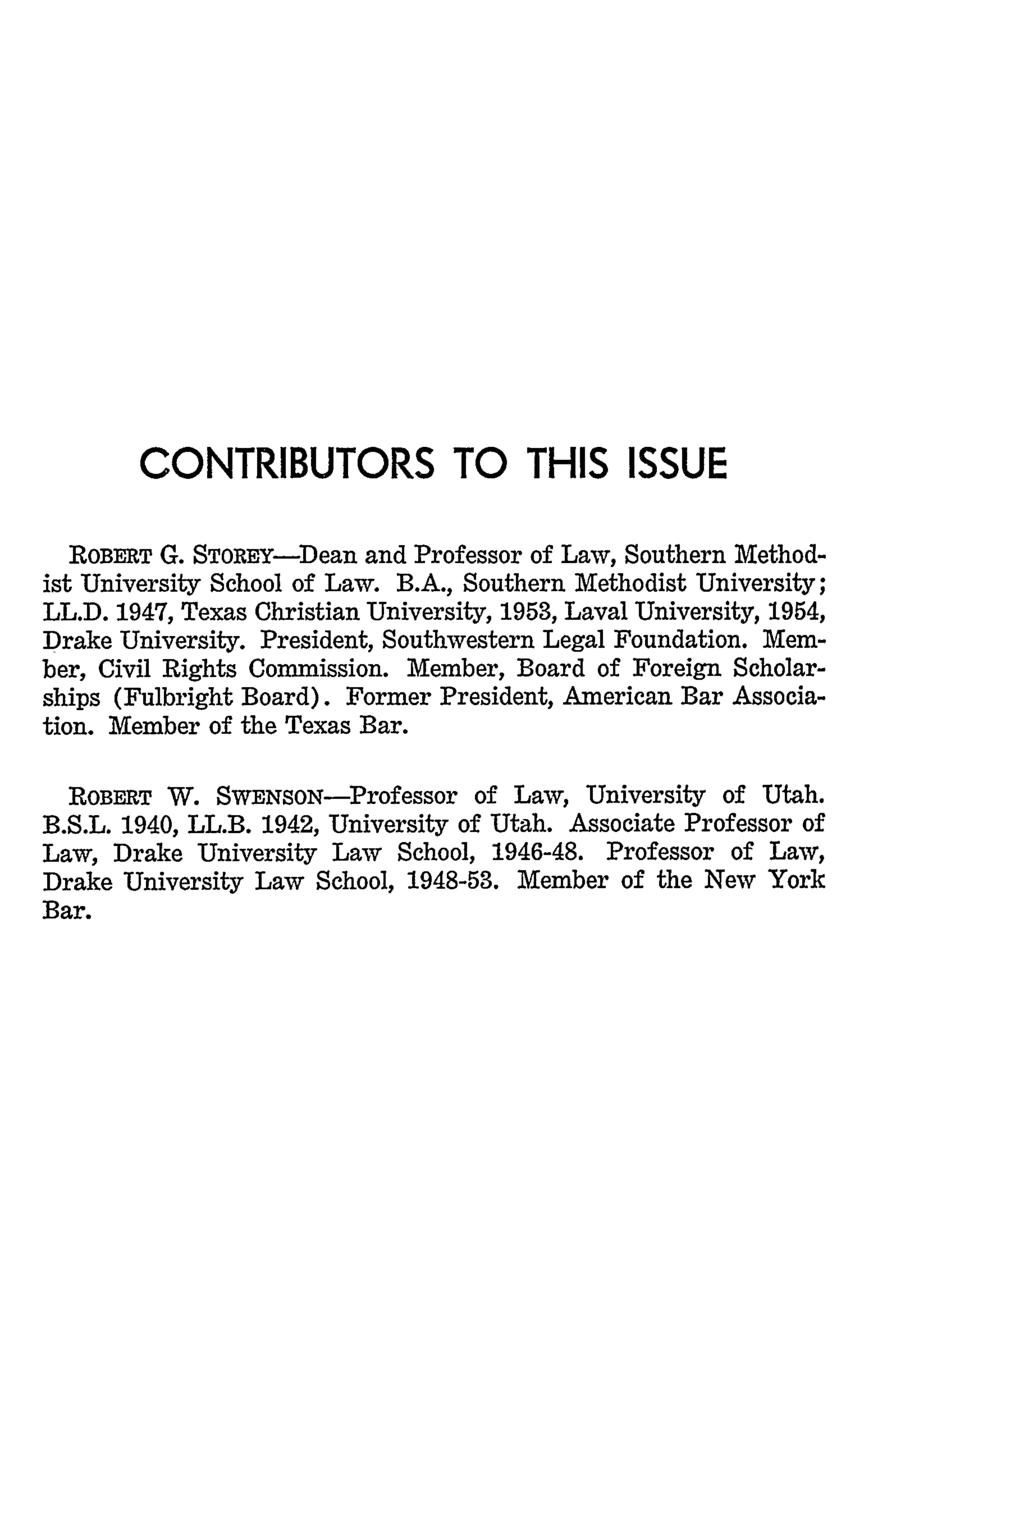 CONTRIBUTORS TO THIS ISSUE ROBERT G. STOREY-Dean and Professor of Law, Southern Methodist University School of Law. B.A., Southern Methodist University; LL.D. 1947, Texas Christian University, 1953, Laval University, 1954, Drake University.